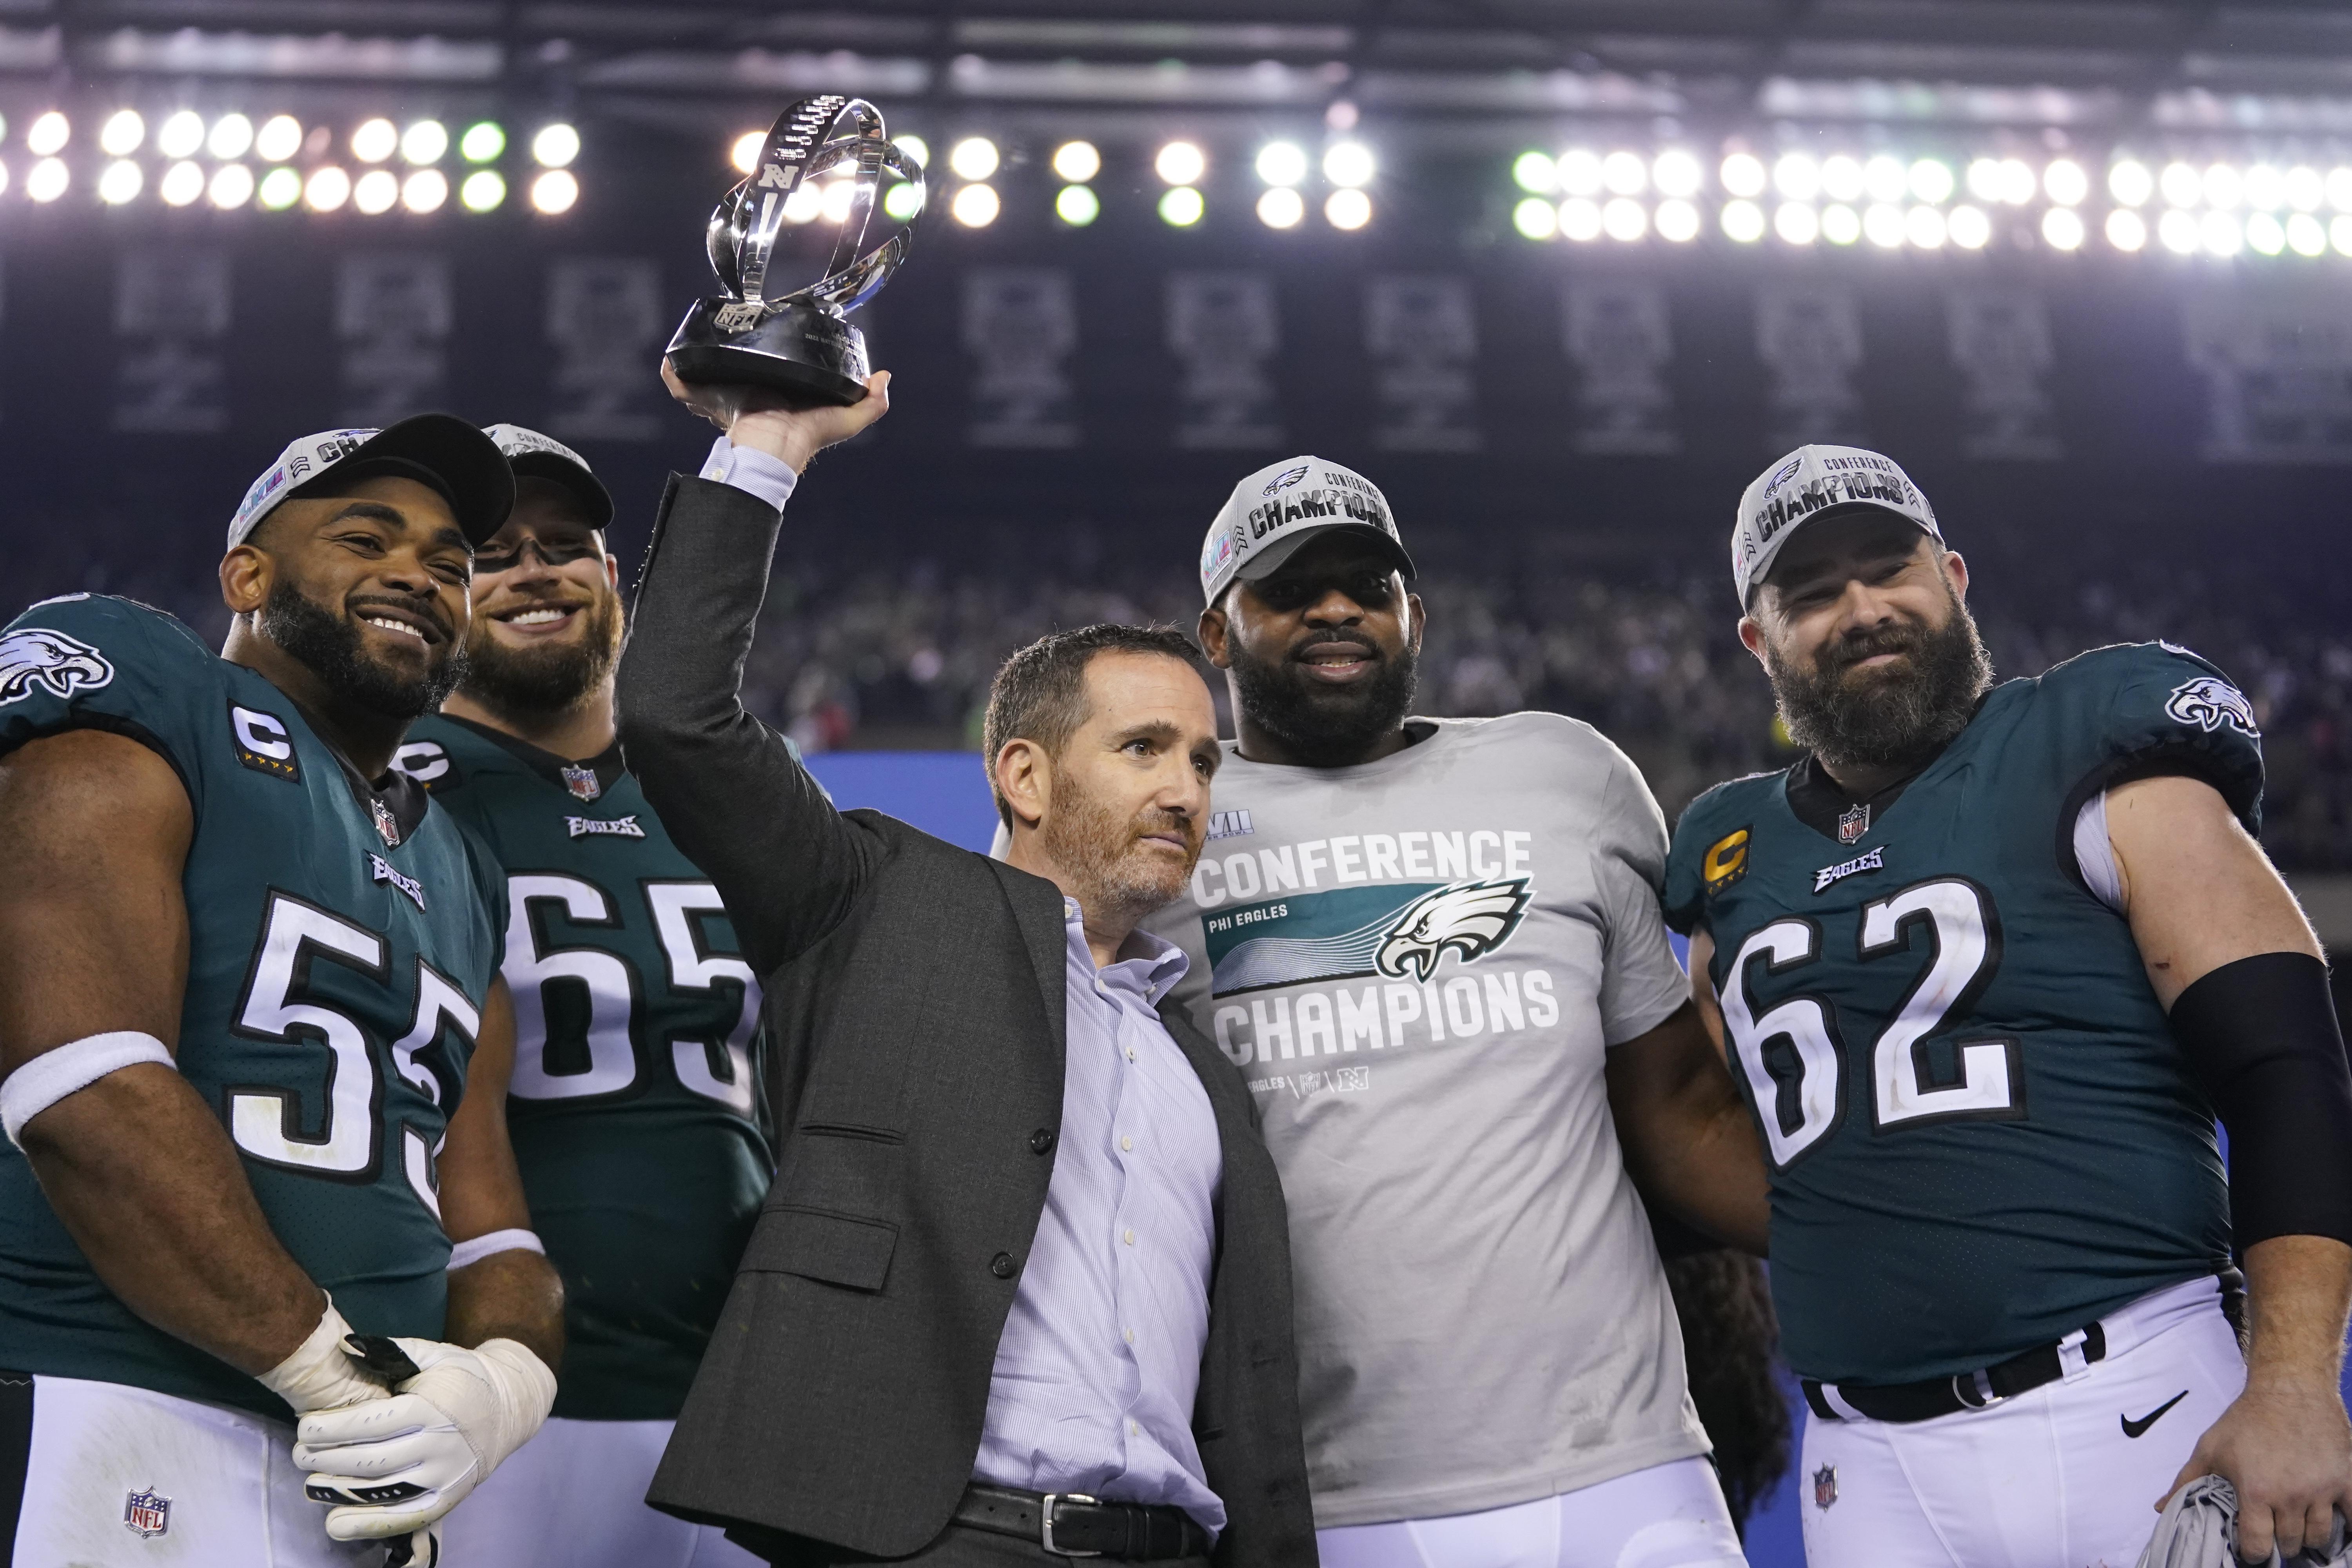 Eagles center Jason Kelce said he's decided to return in 2023 